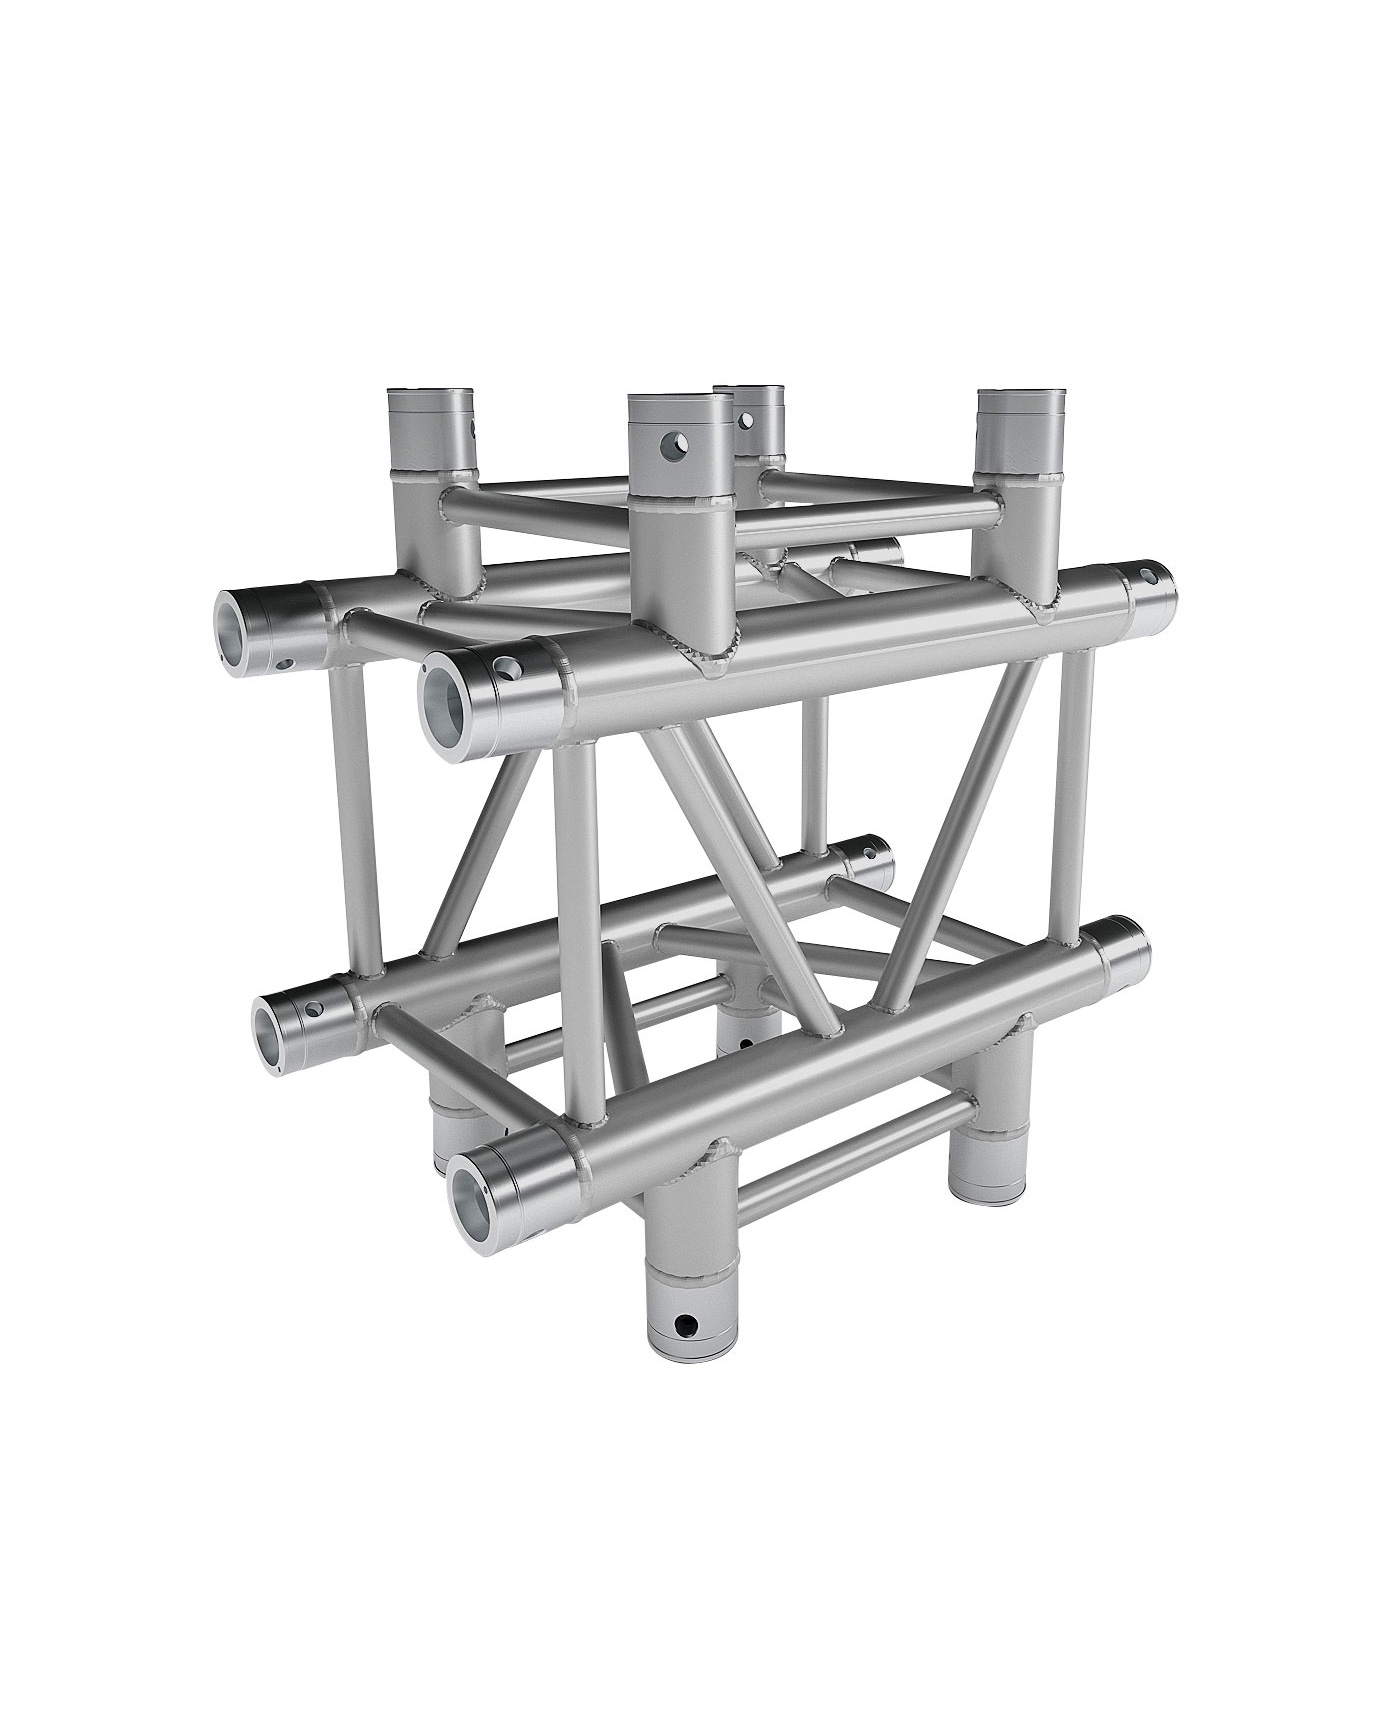 Quatro aluminium corner 290 - heavy duty - 4 directions 90- - <strong>Connection kits included</strong>